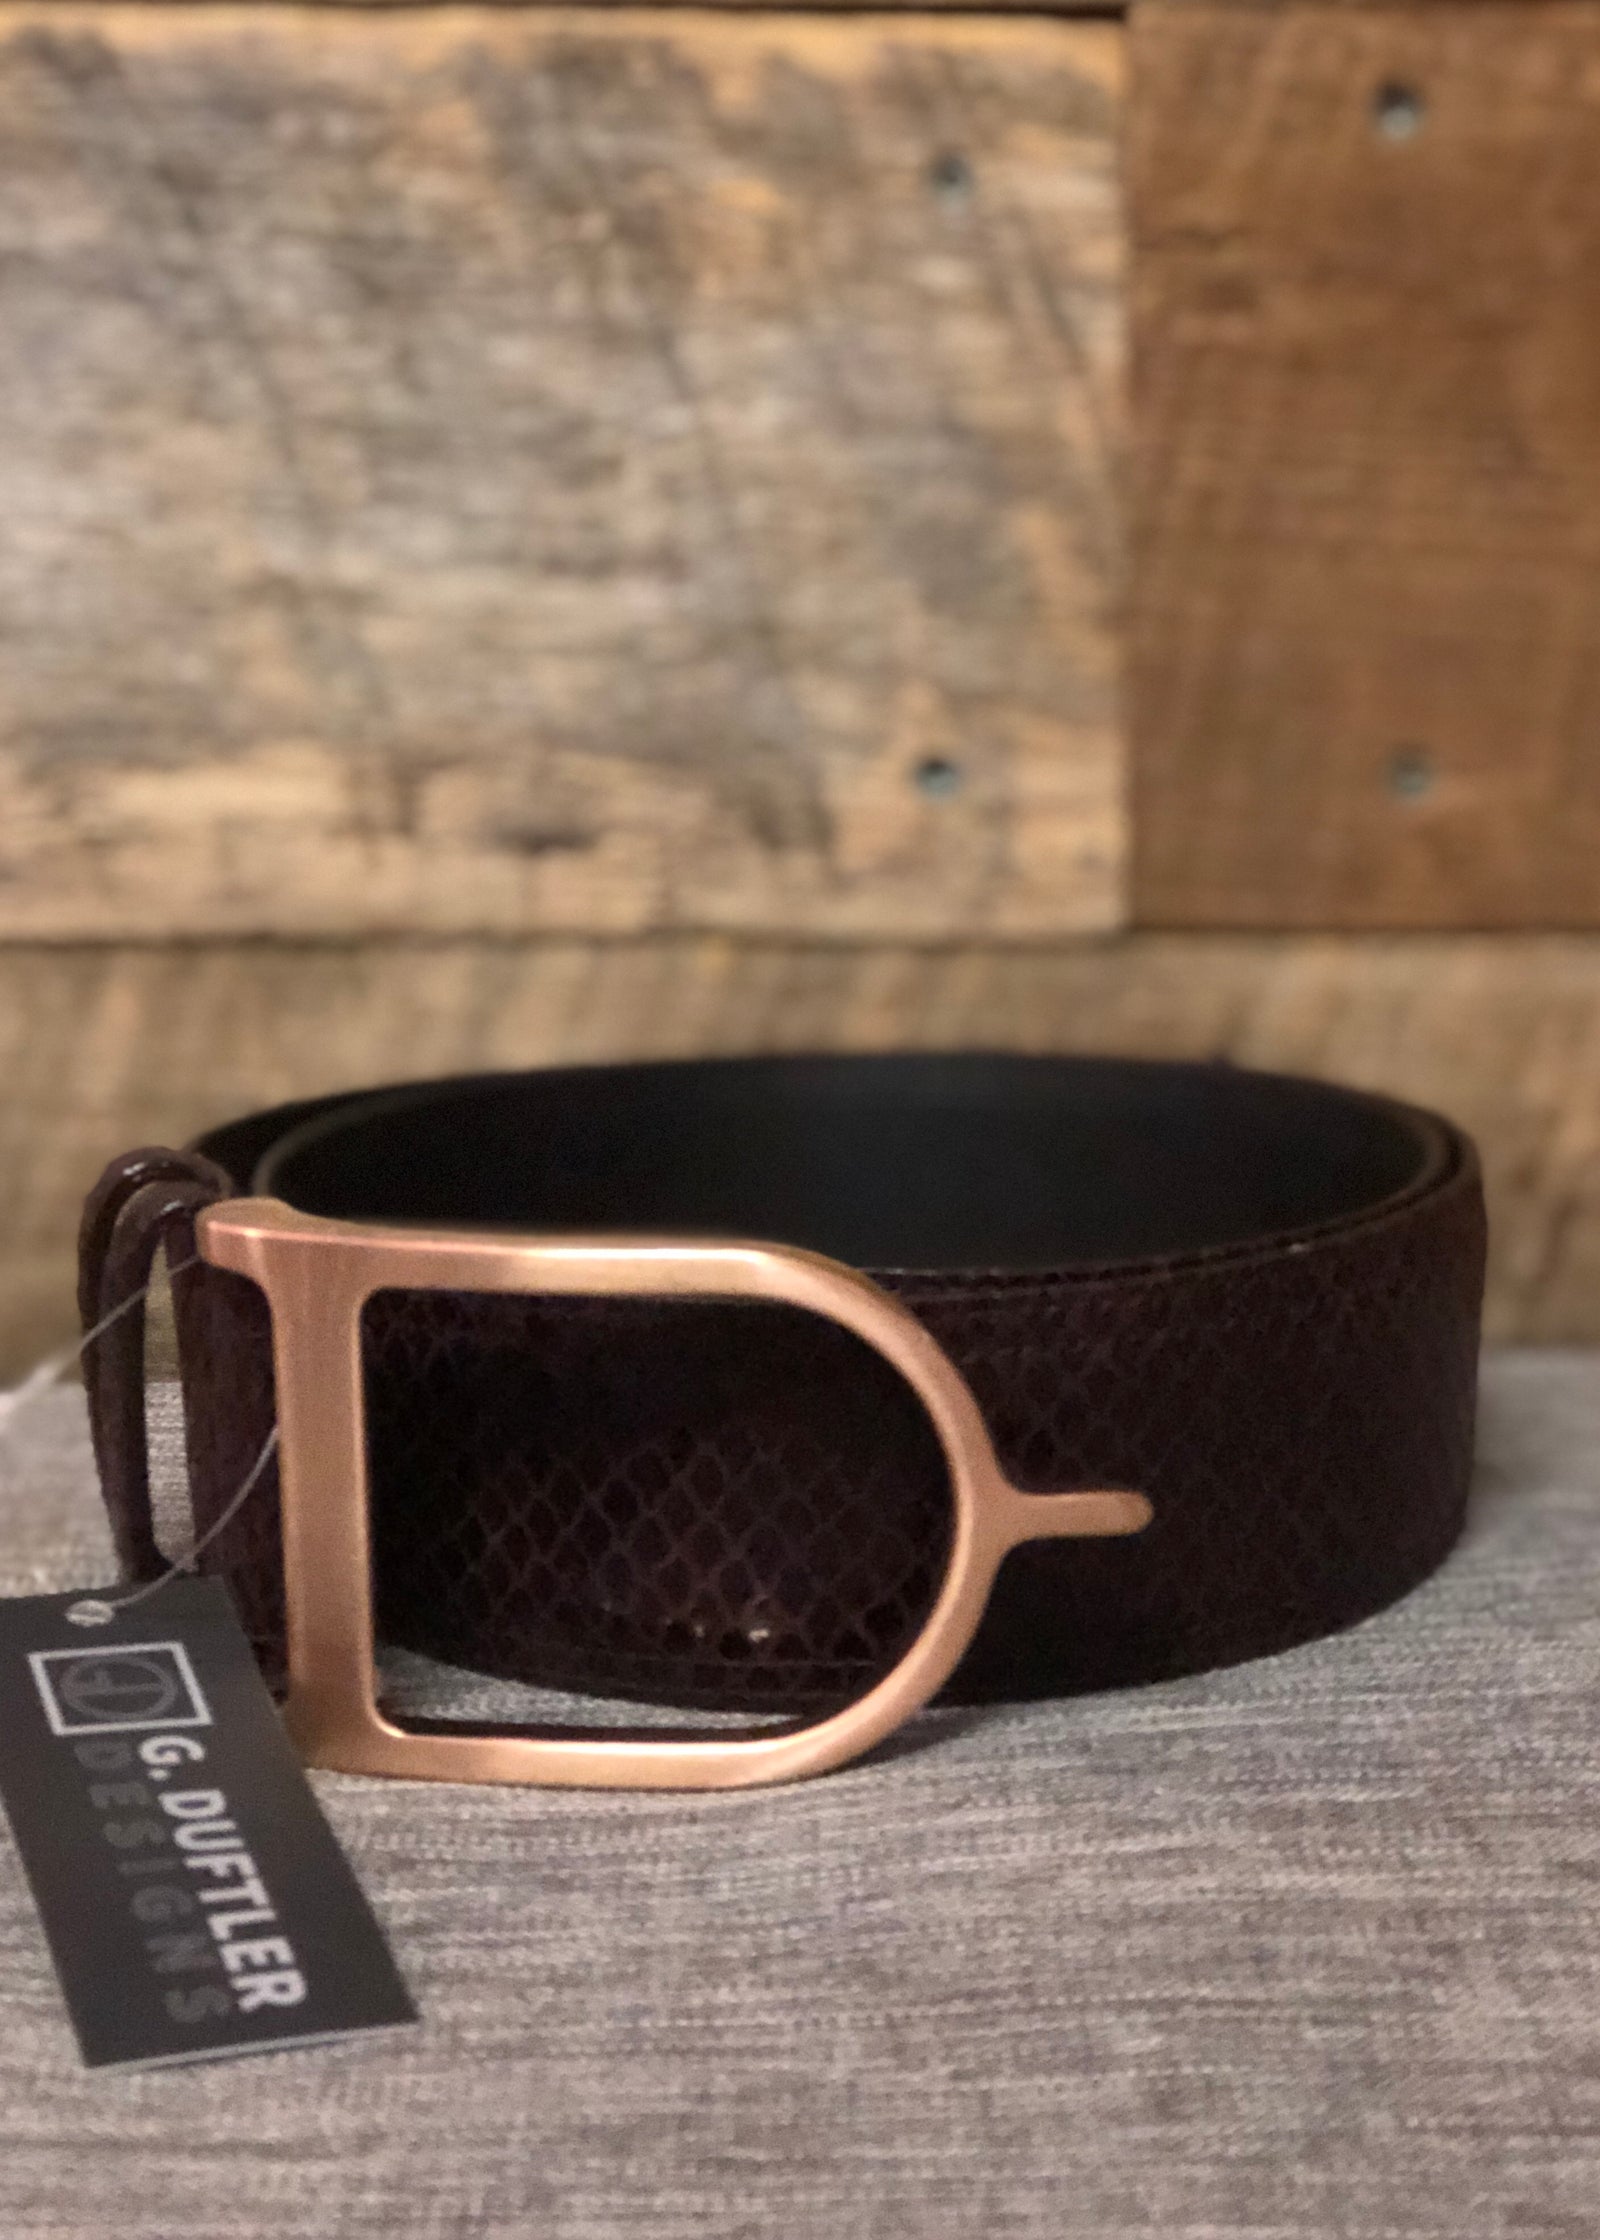 Duftler Spur Belt Burgundy Scale with Rose Gold Buckle - Luxe EQ